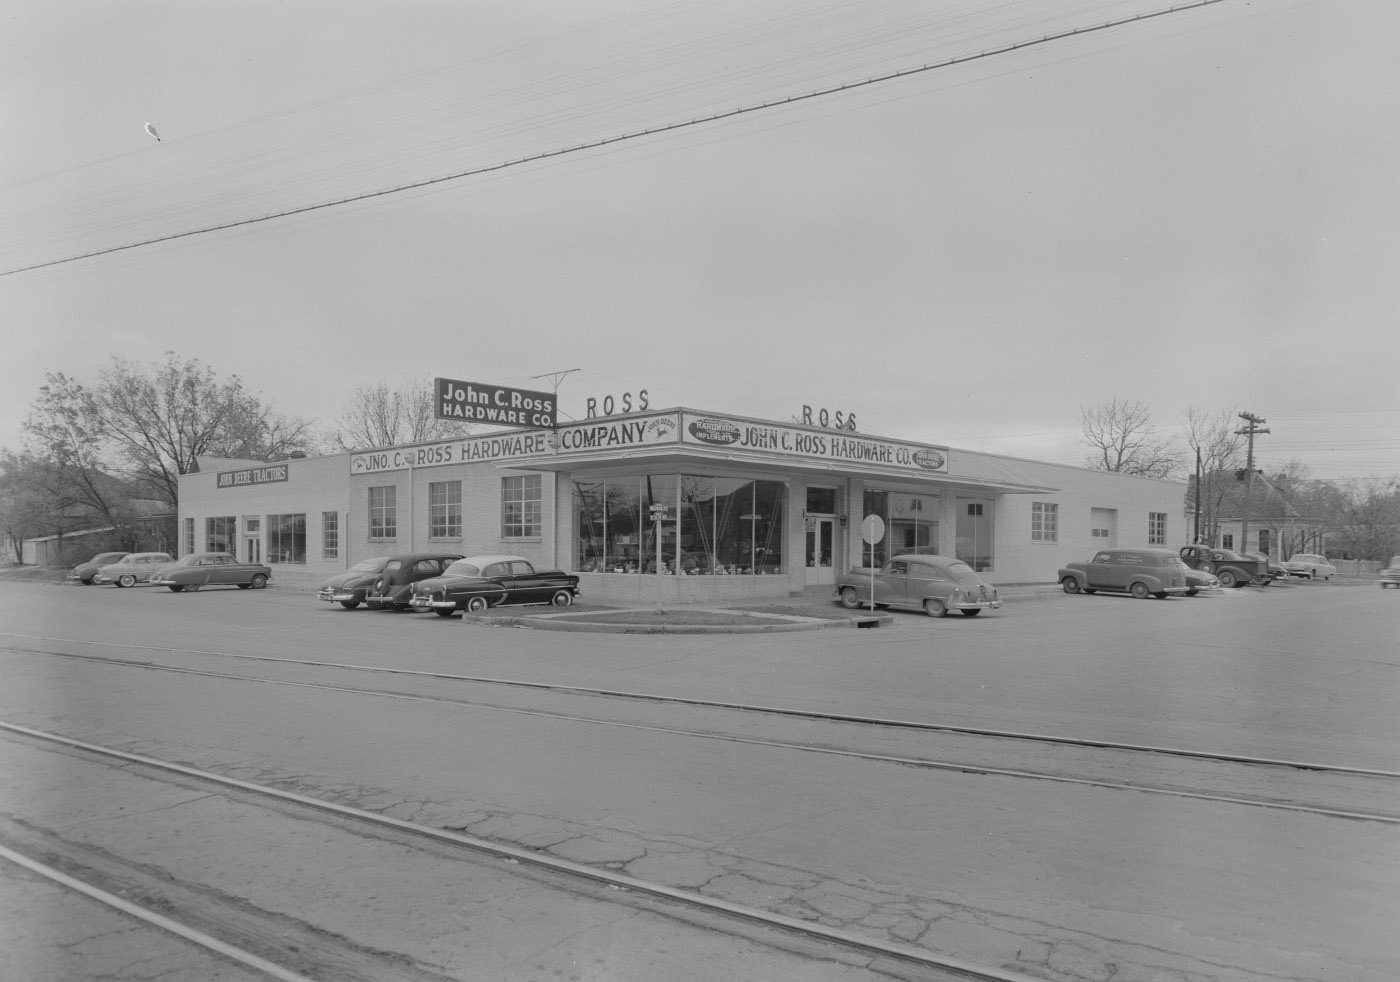 John C. Ross Hardware and John Deere Stores with Cars, 1954.